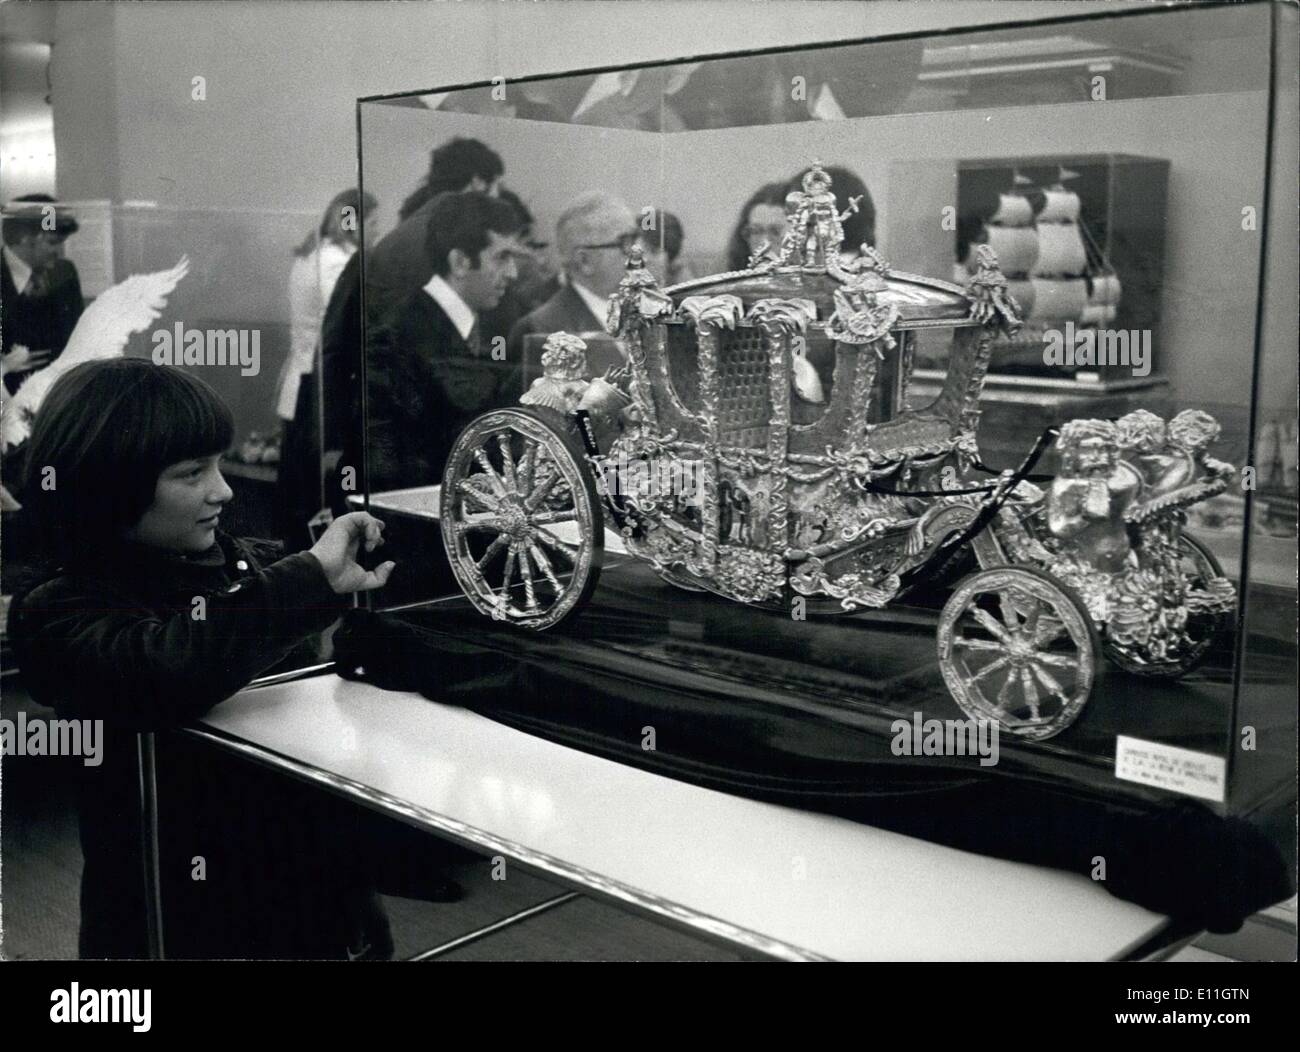 Feb. 08, 1978 - Museum of Decorative Arts in Paris,Model royal coach on display Stock Photo